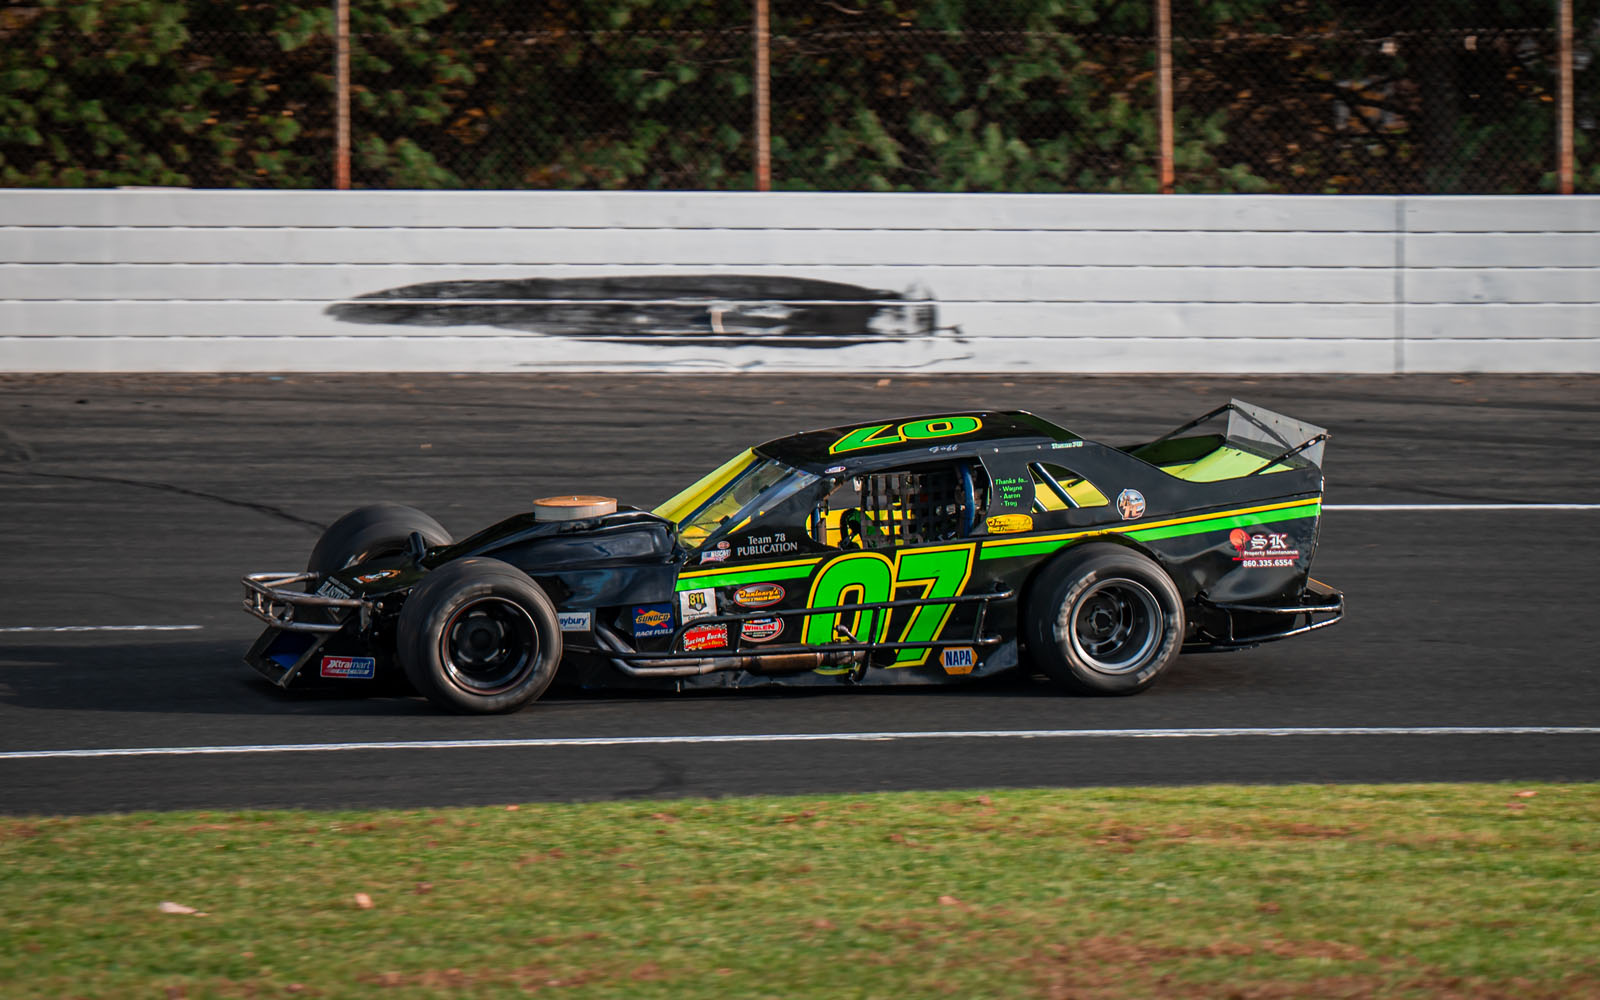 Third Generation Driver Austin Goff Set to Duel For SK Light Rookie Honors at Stafford Speedway